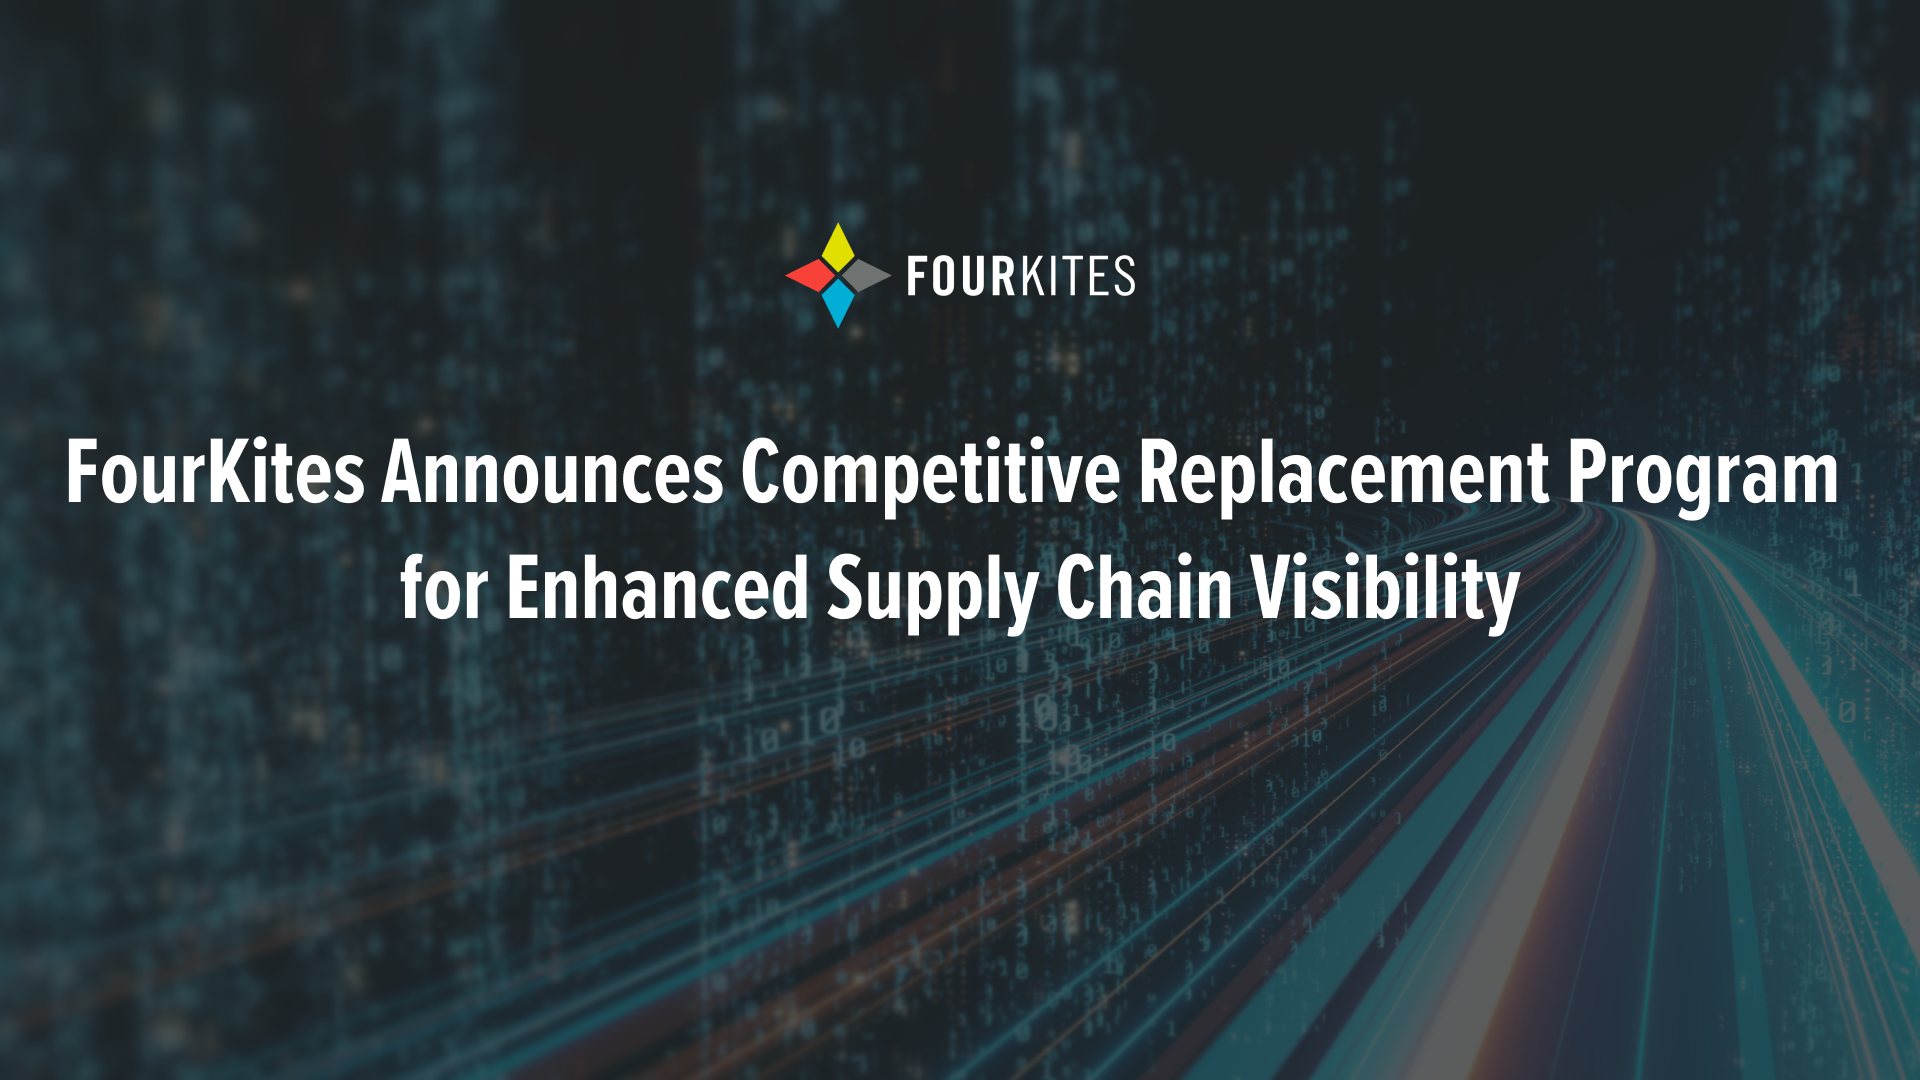 FourKites Announces Competitive Replacement Program for Enhanced Supply Chain Visibility